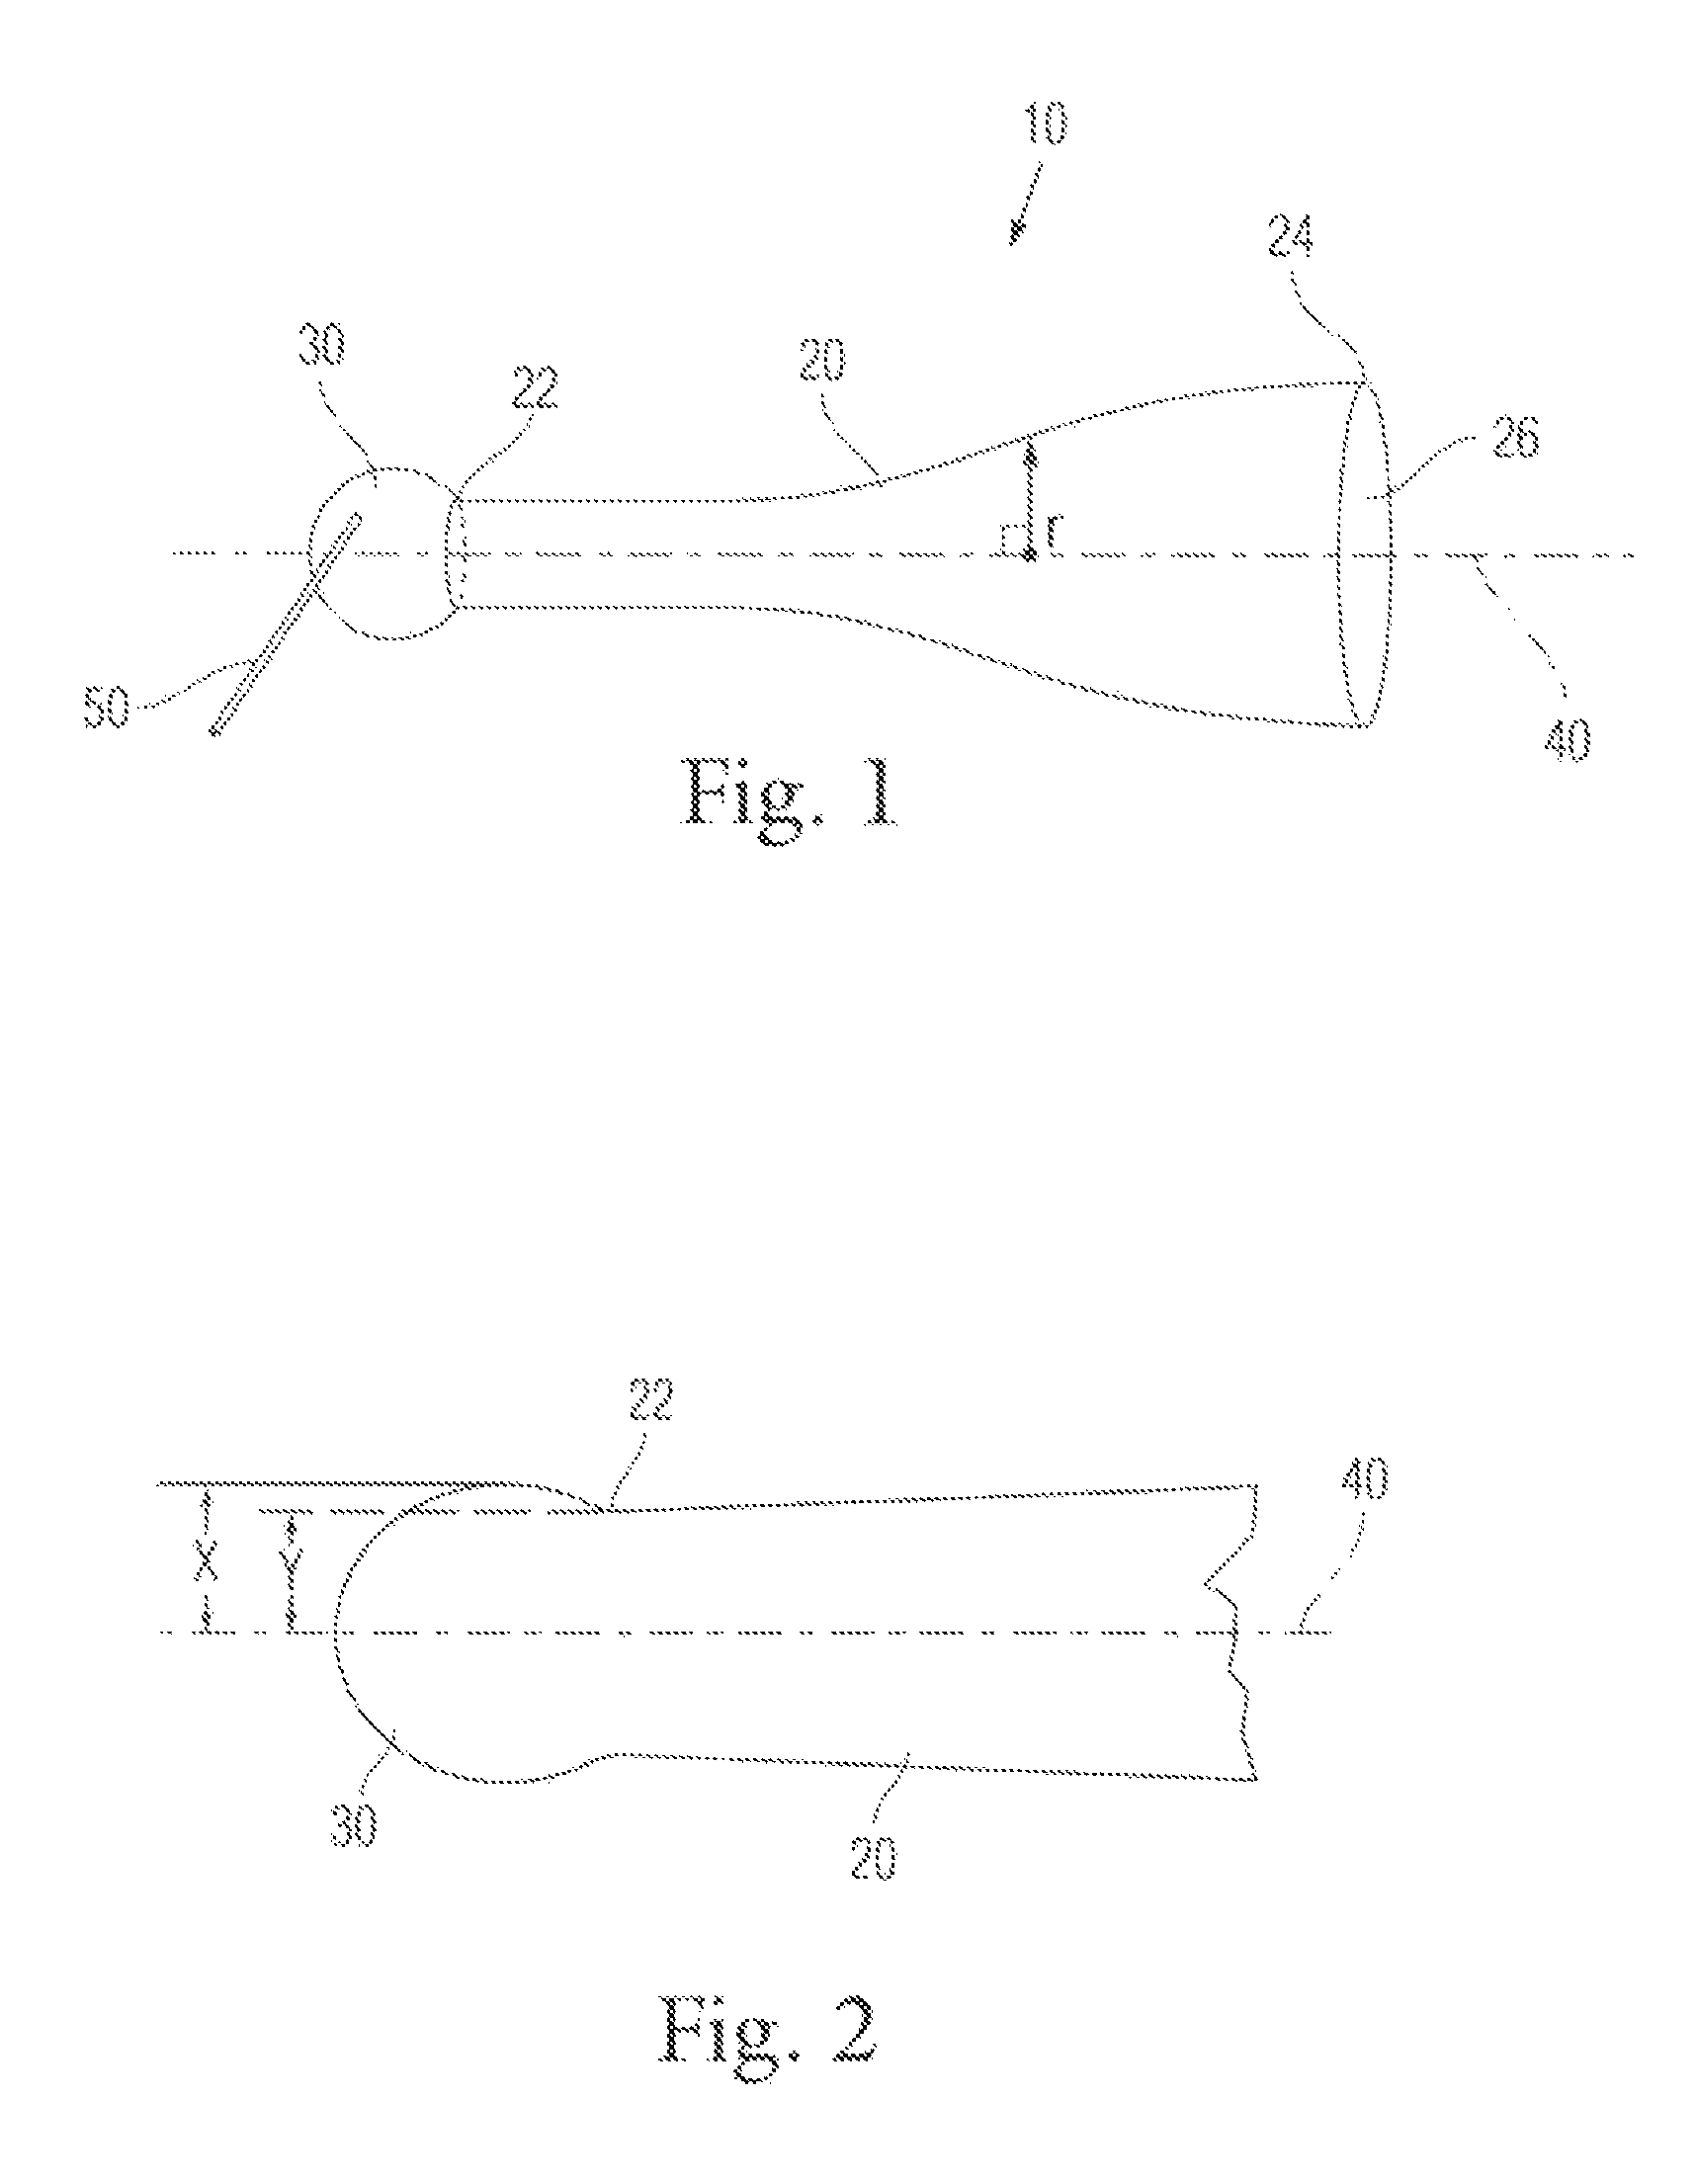 Optical device, system, and method of generating high angular momentum beams